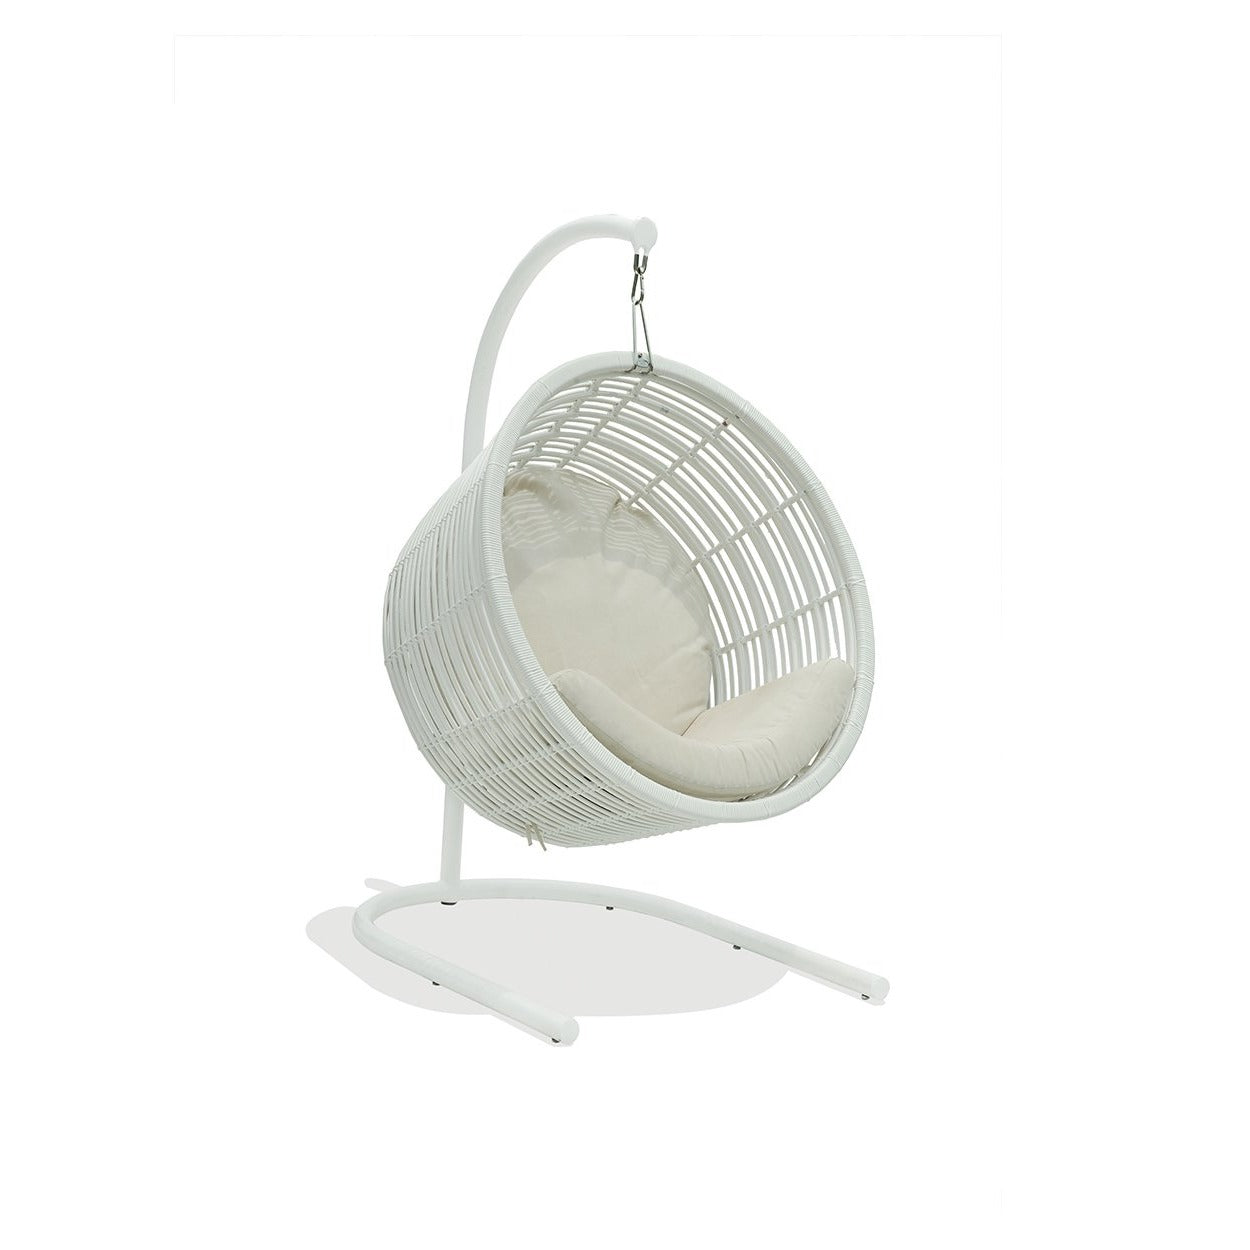 Mercy Hanging Chair with Stand